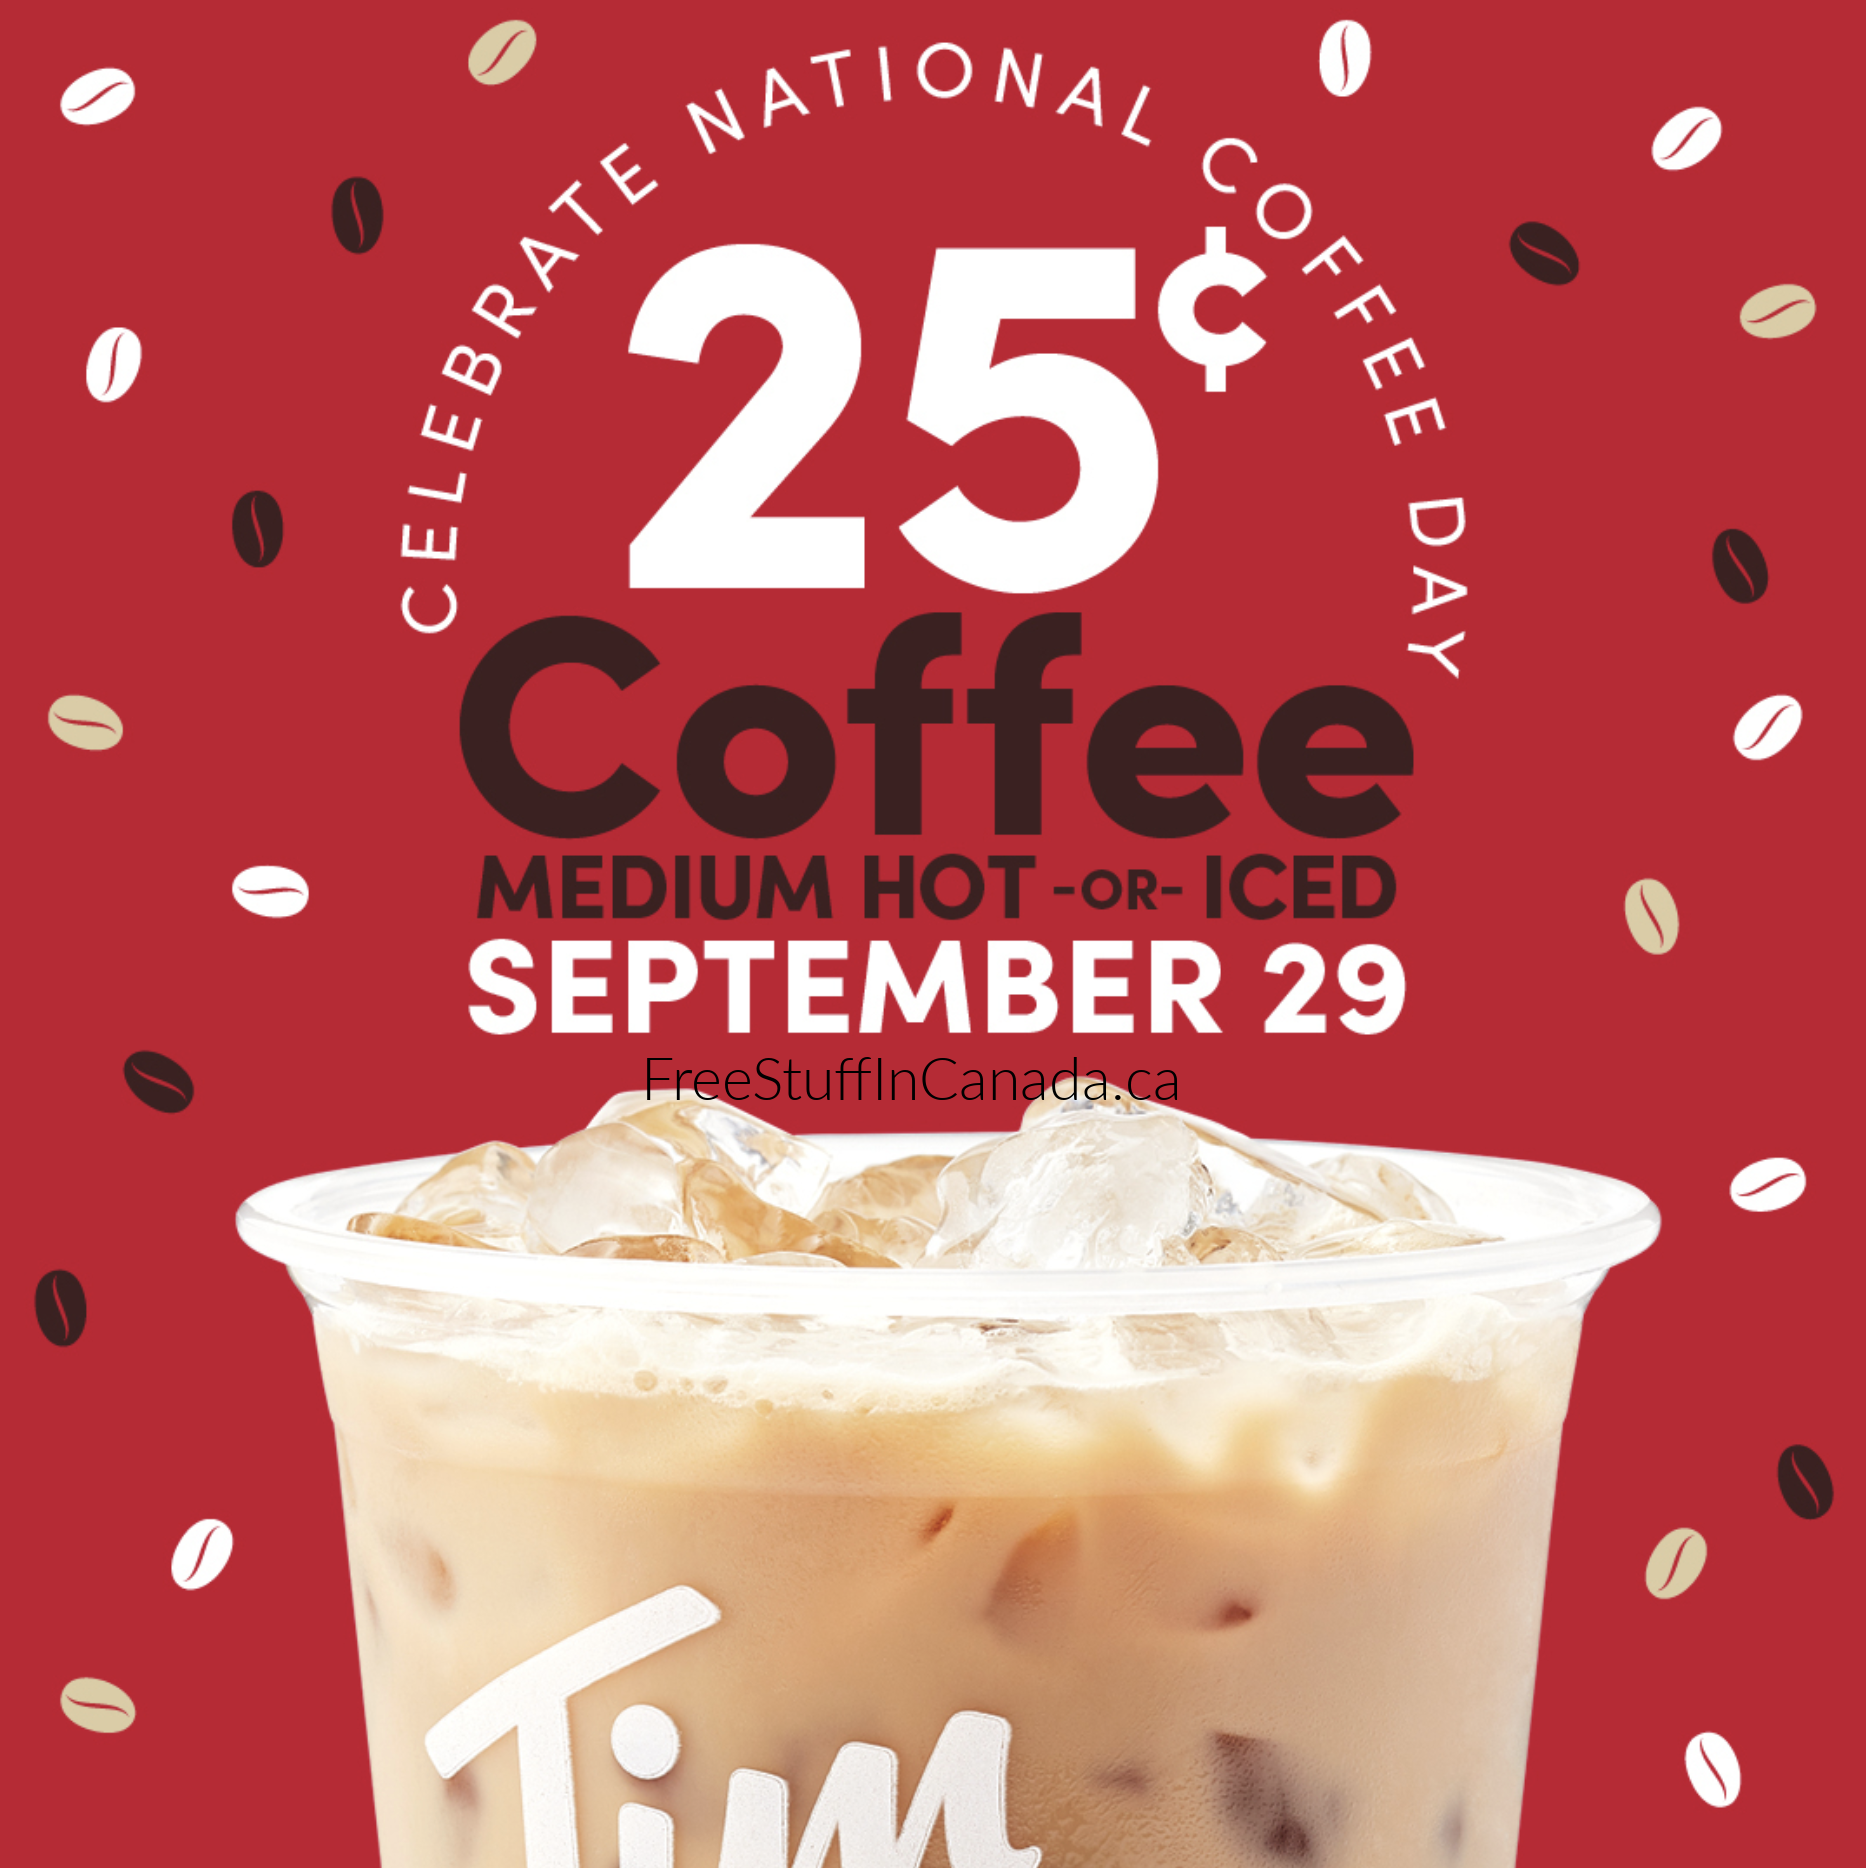 tim hortons national coffee day deal